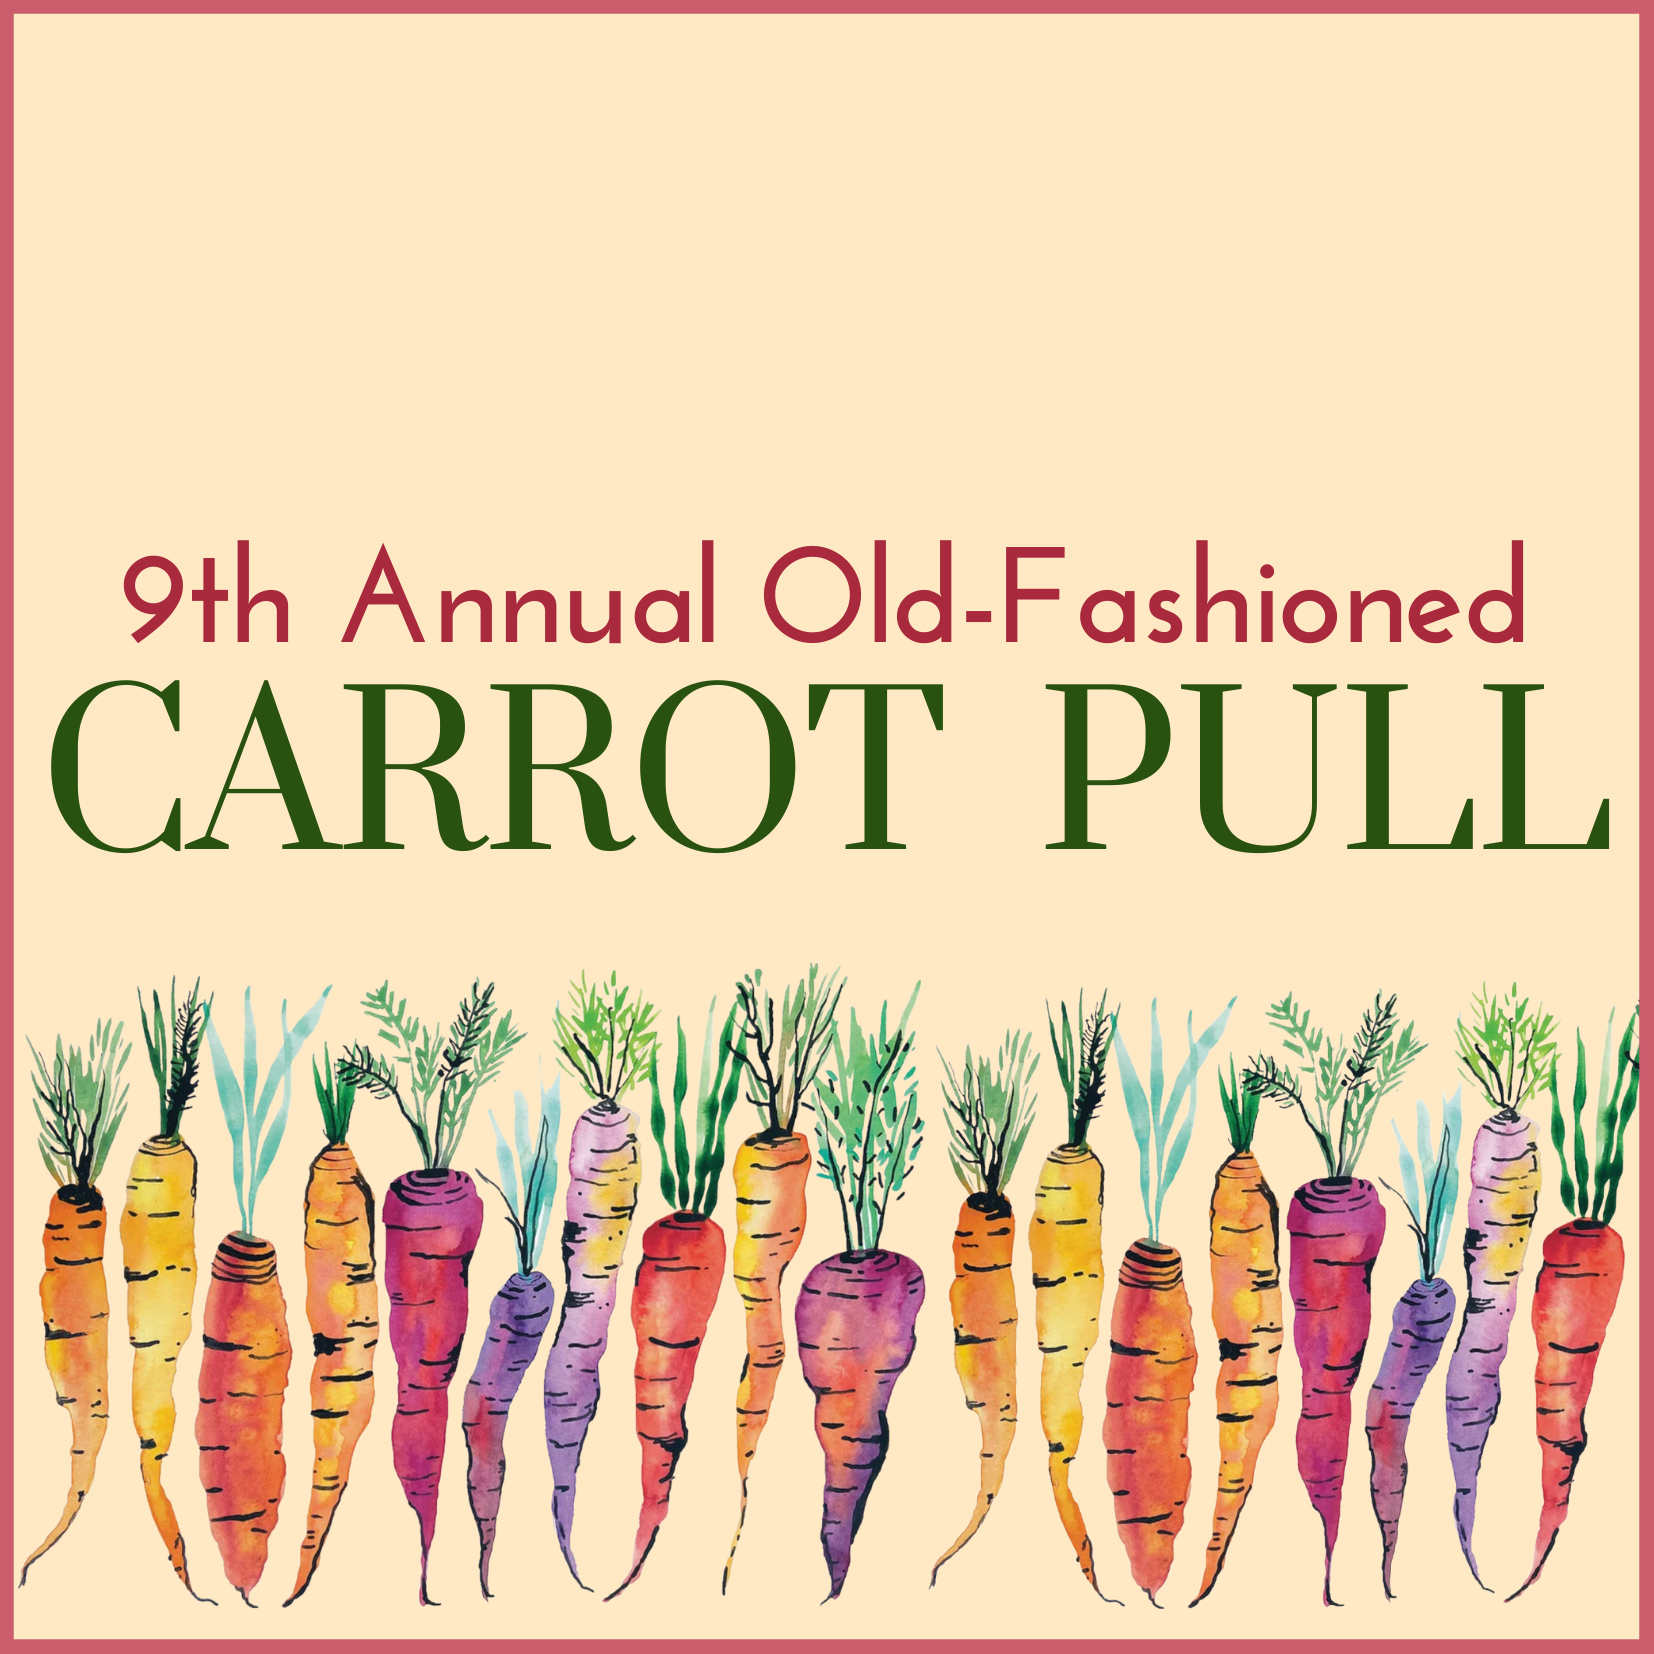 9th Annual Old-Fashioned Carrot Pull